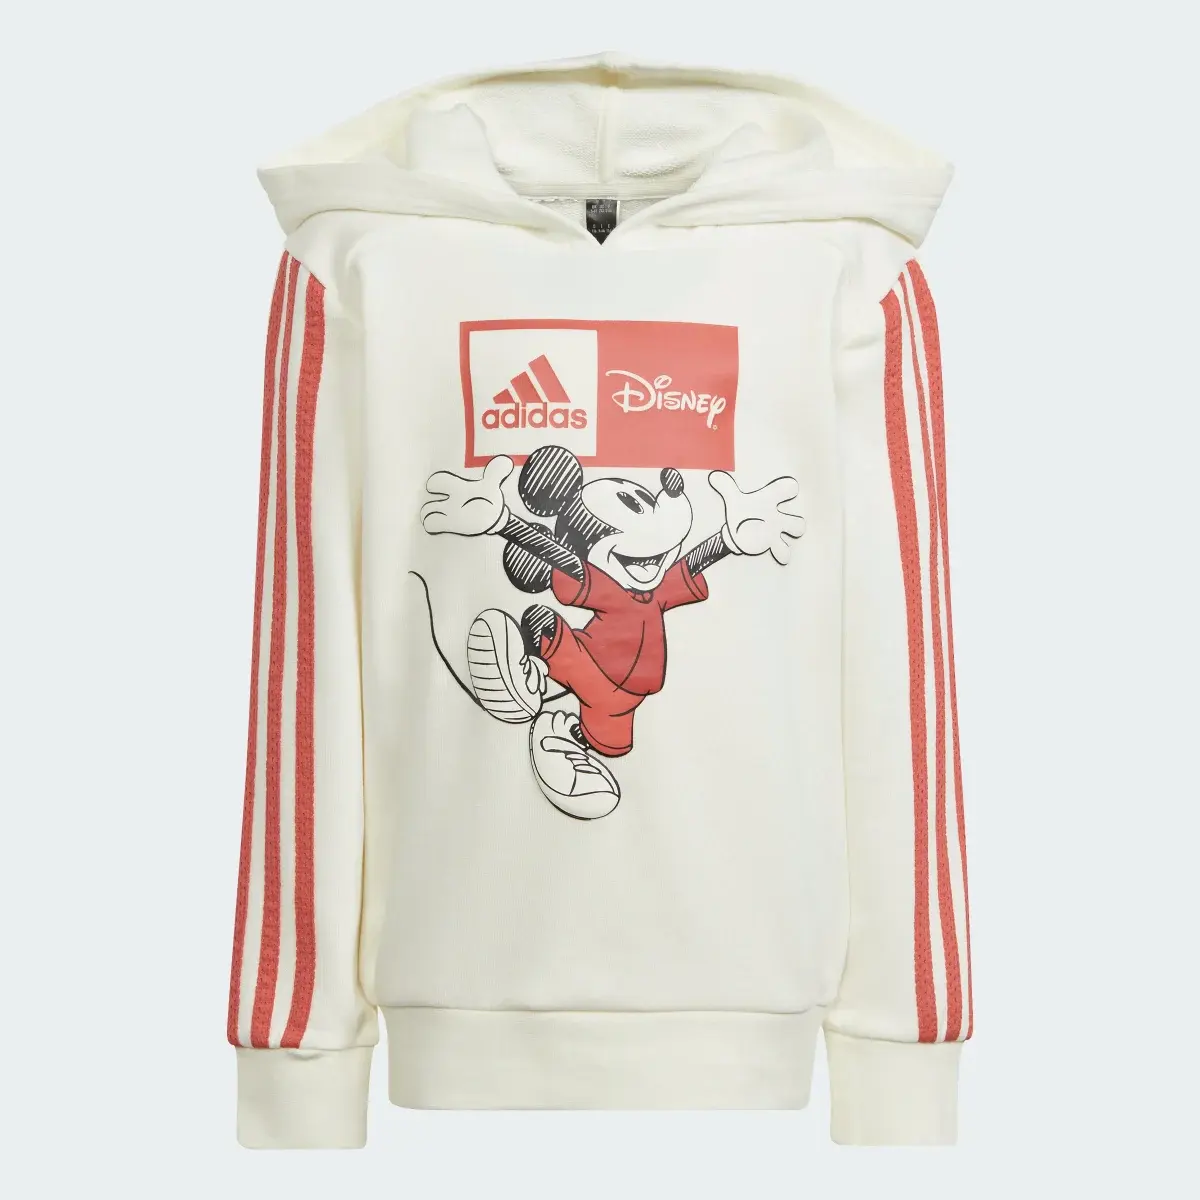 Adidas x Disney Mickey Mouse Hoodie and Jogger Set. 3